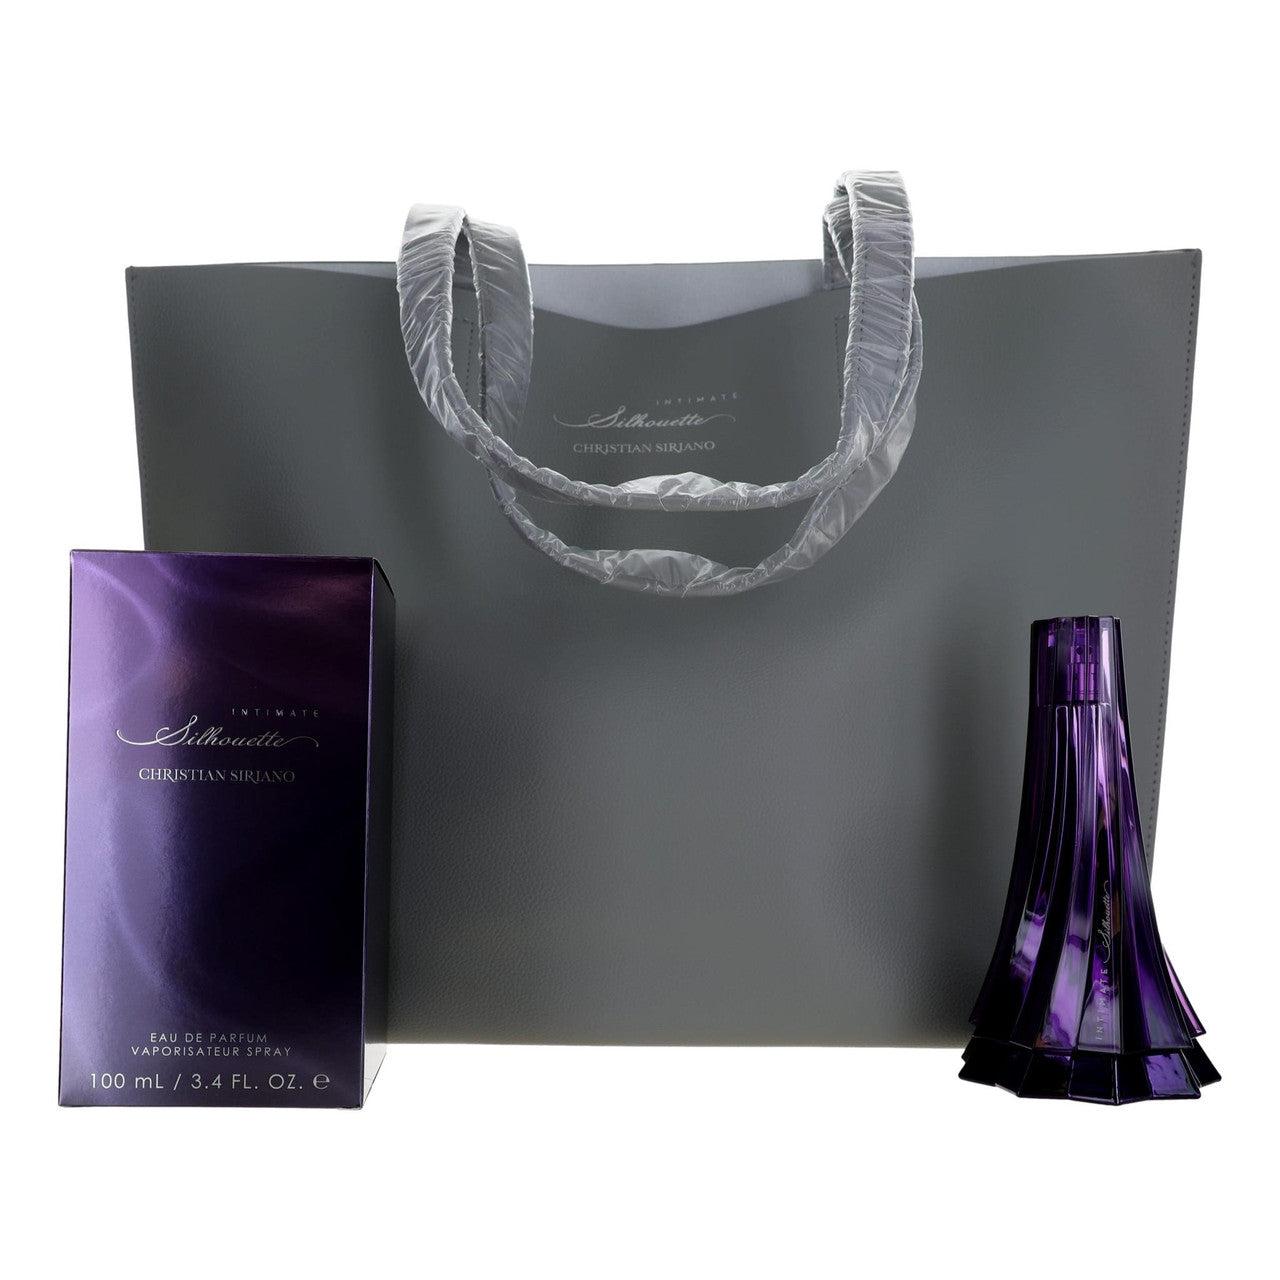 Intimate Silhouette by Christian Siriano, 2 Piece Gift Set women with Tote Bag